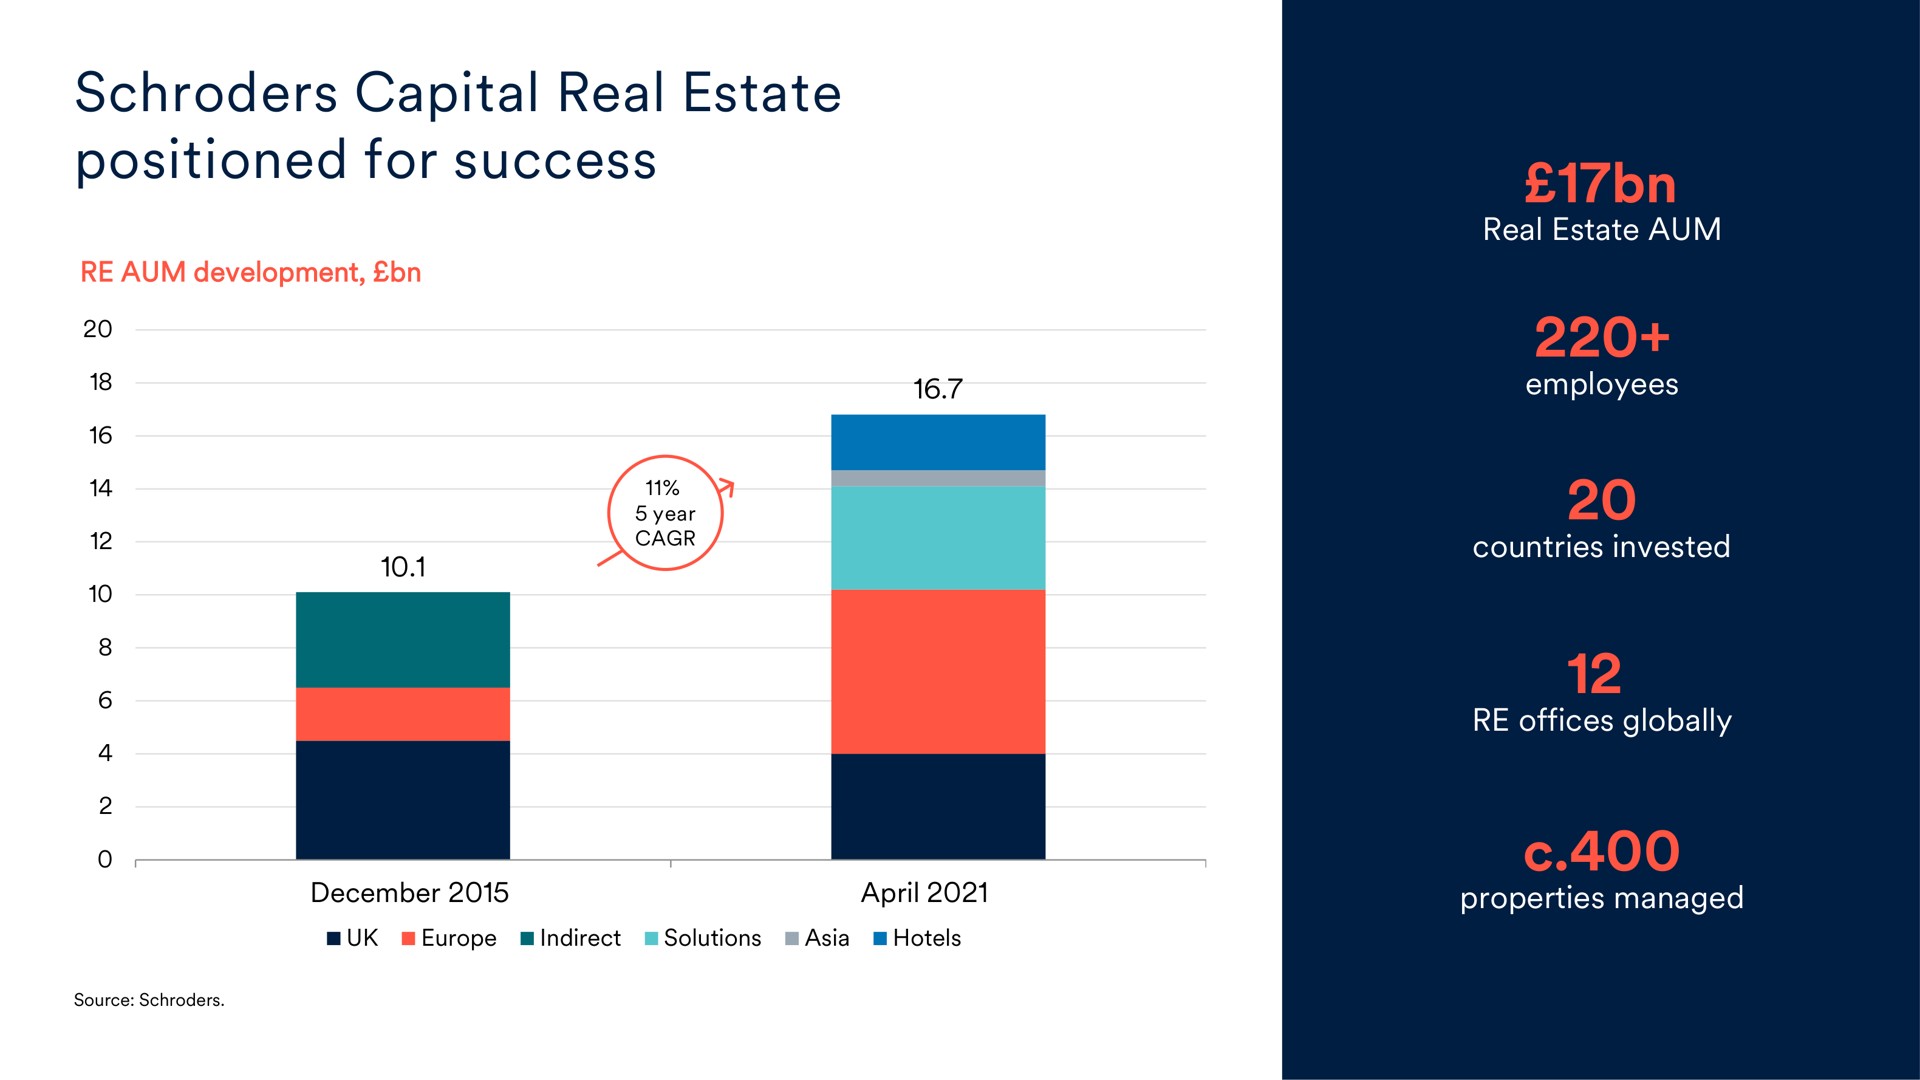 capital real estate positioned for success | Schroders